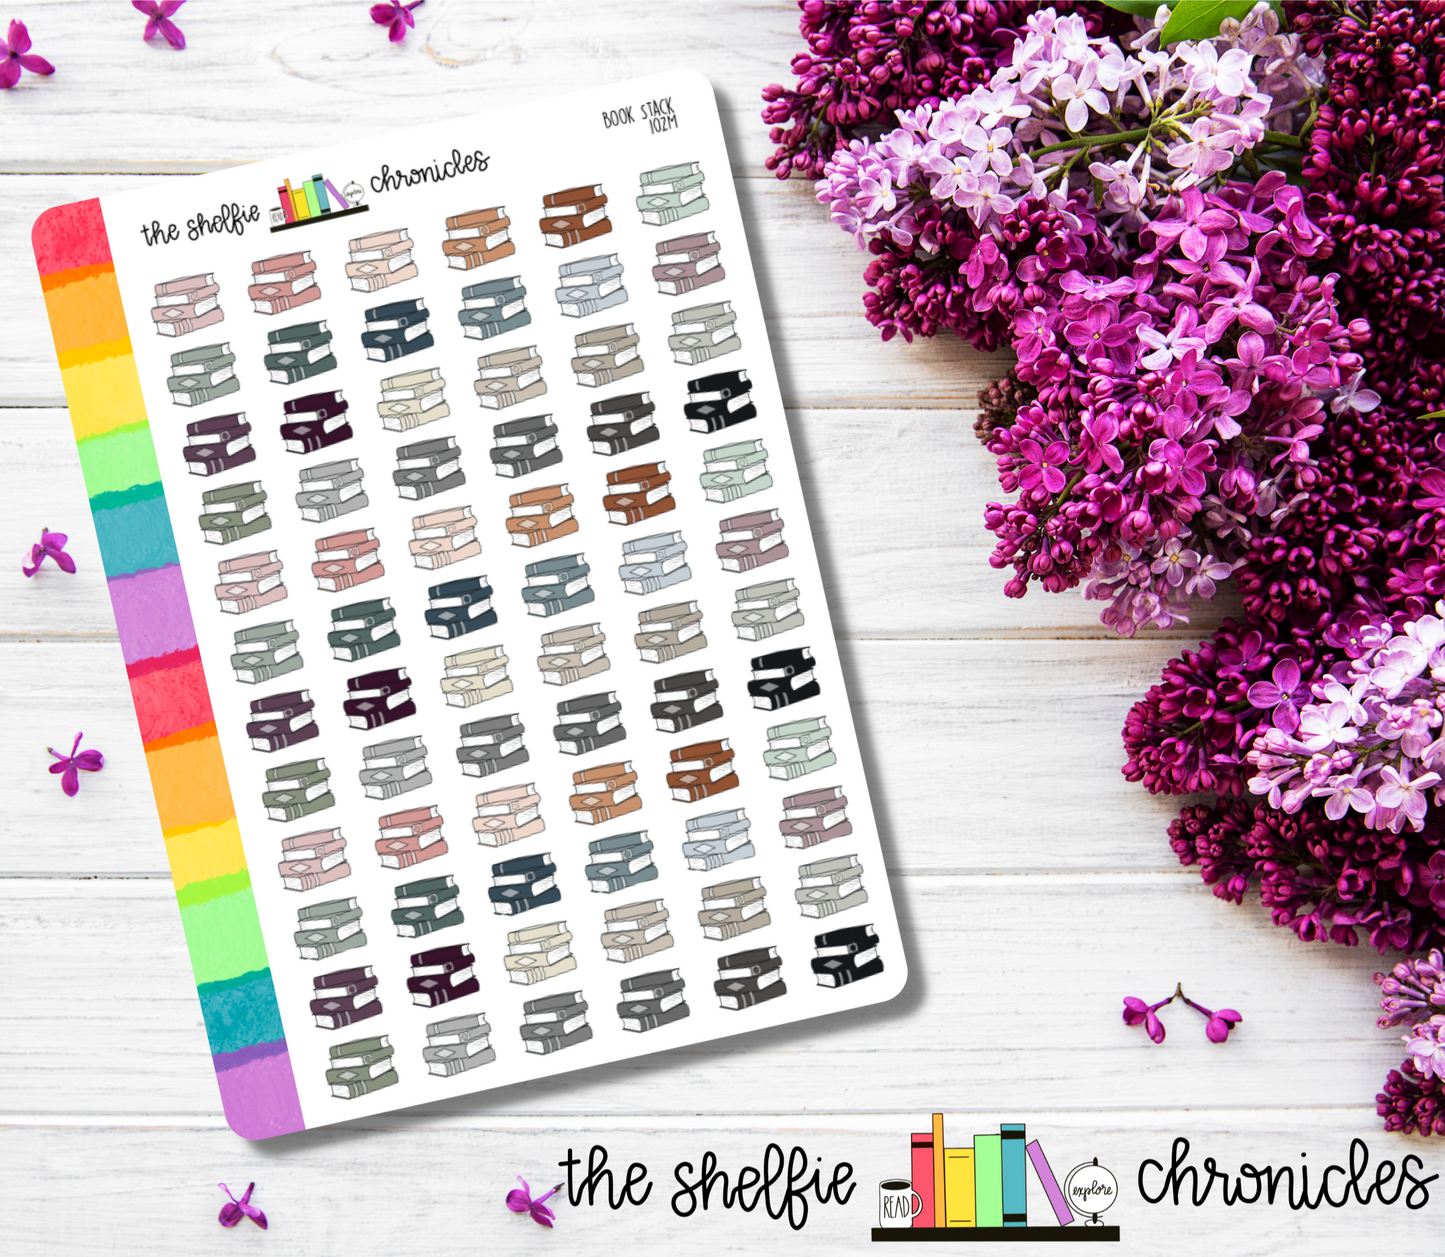 102 - Book Stacks - Choose Your Color - Die Cut Stickers - Repositionable Paper - Perfect For Planners And Reading Journals